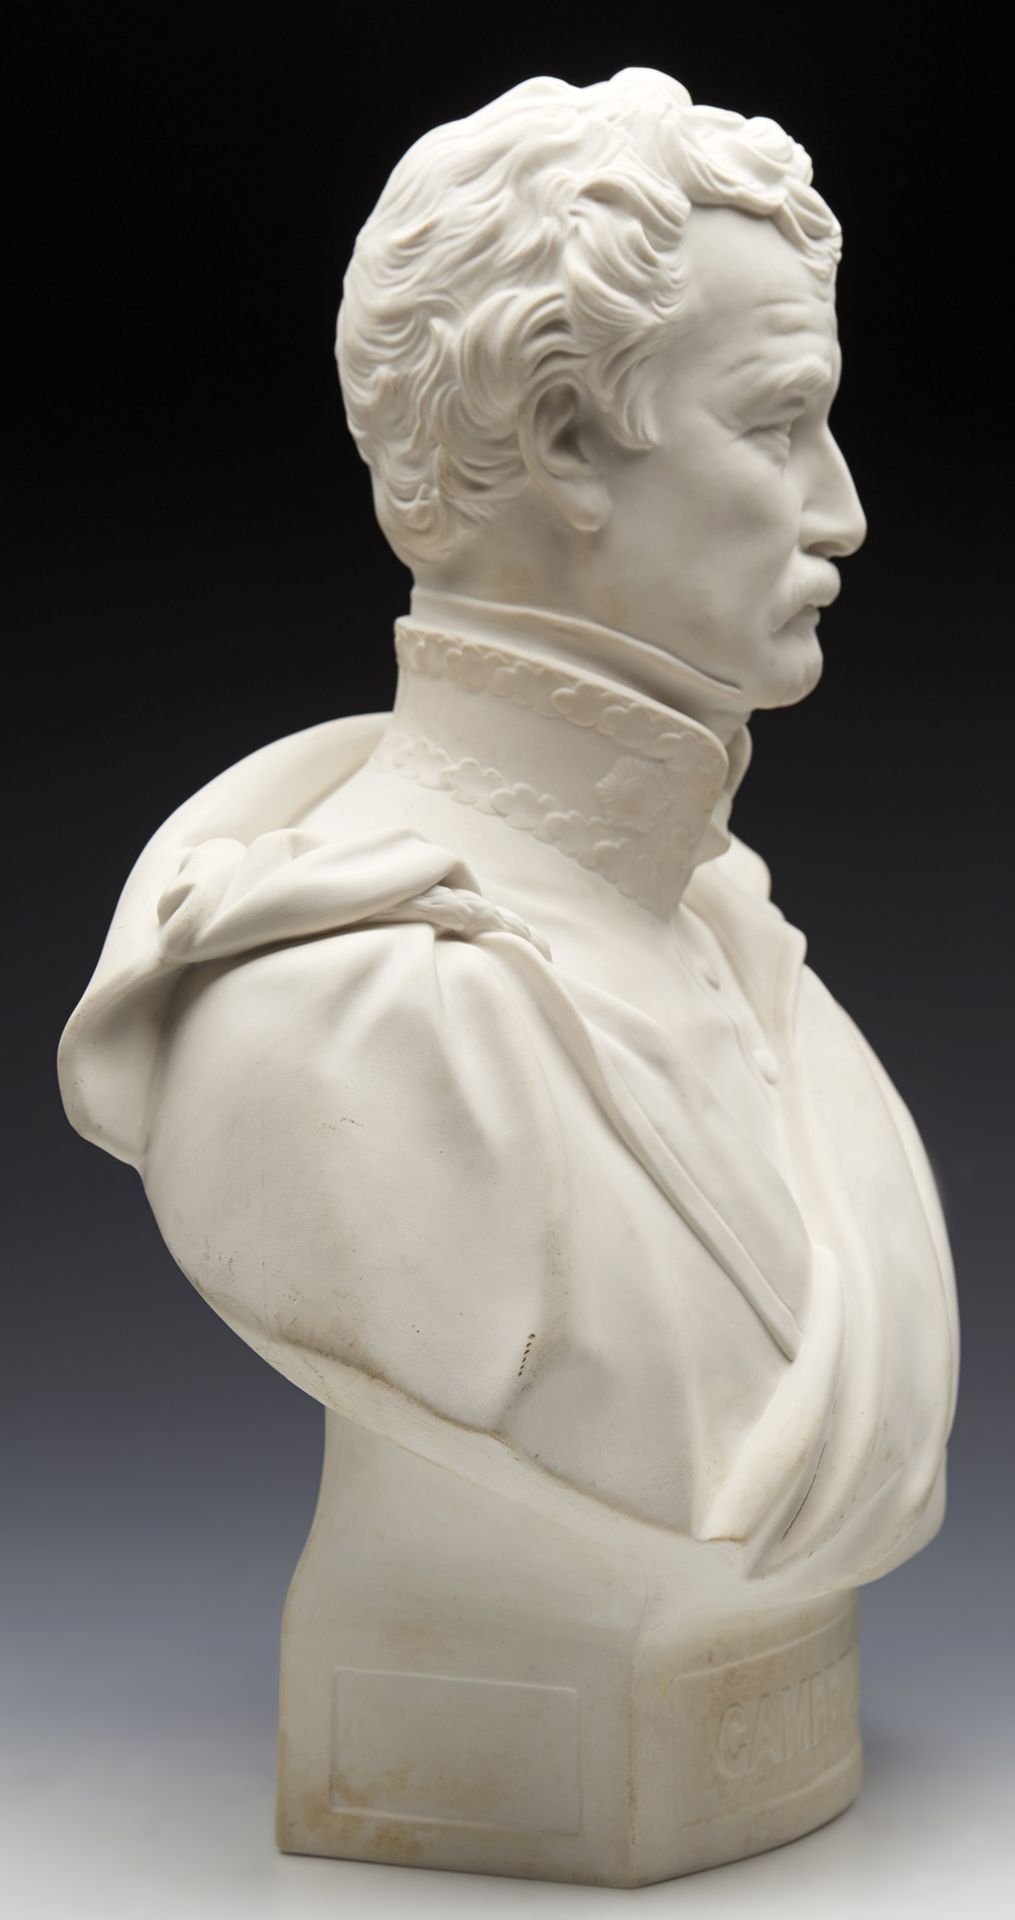 ANTIQUE RIDGWAY PARIAN BUST OF SIR COLIN CAMPBELL BY J DURHAM 1858 - Image 7 of 12